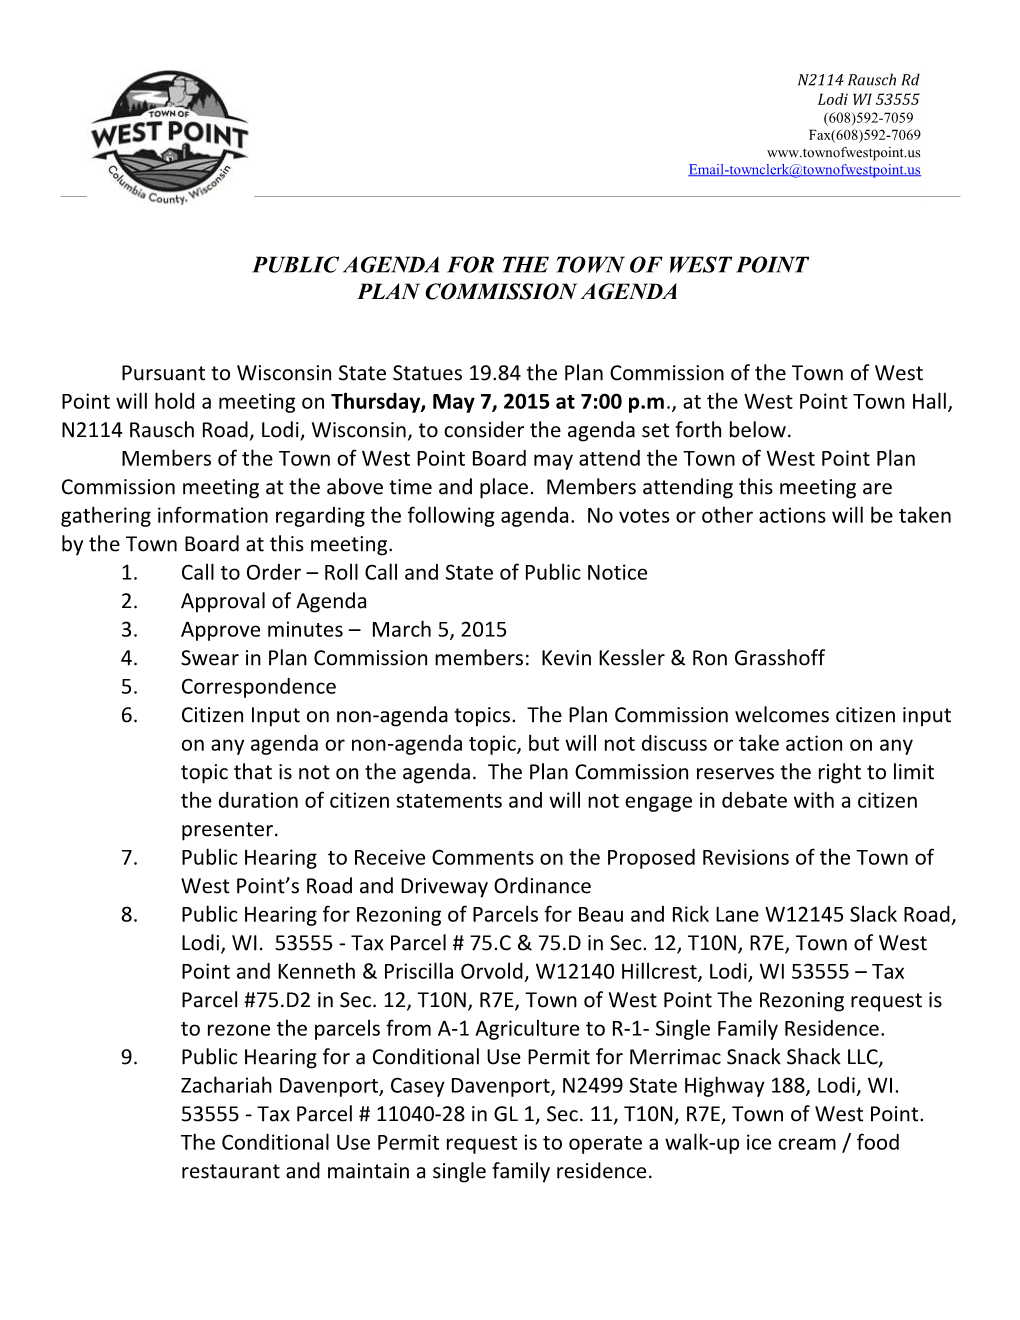 Public Agenda for the Town of West Point